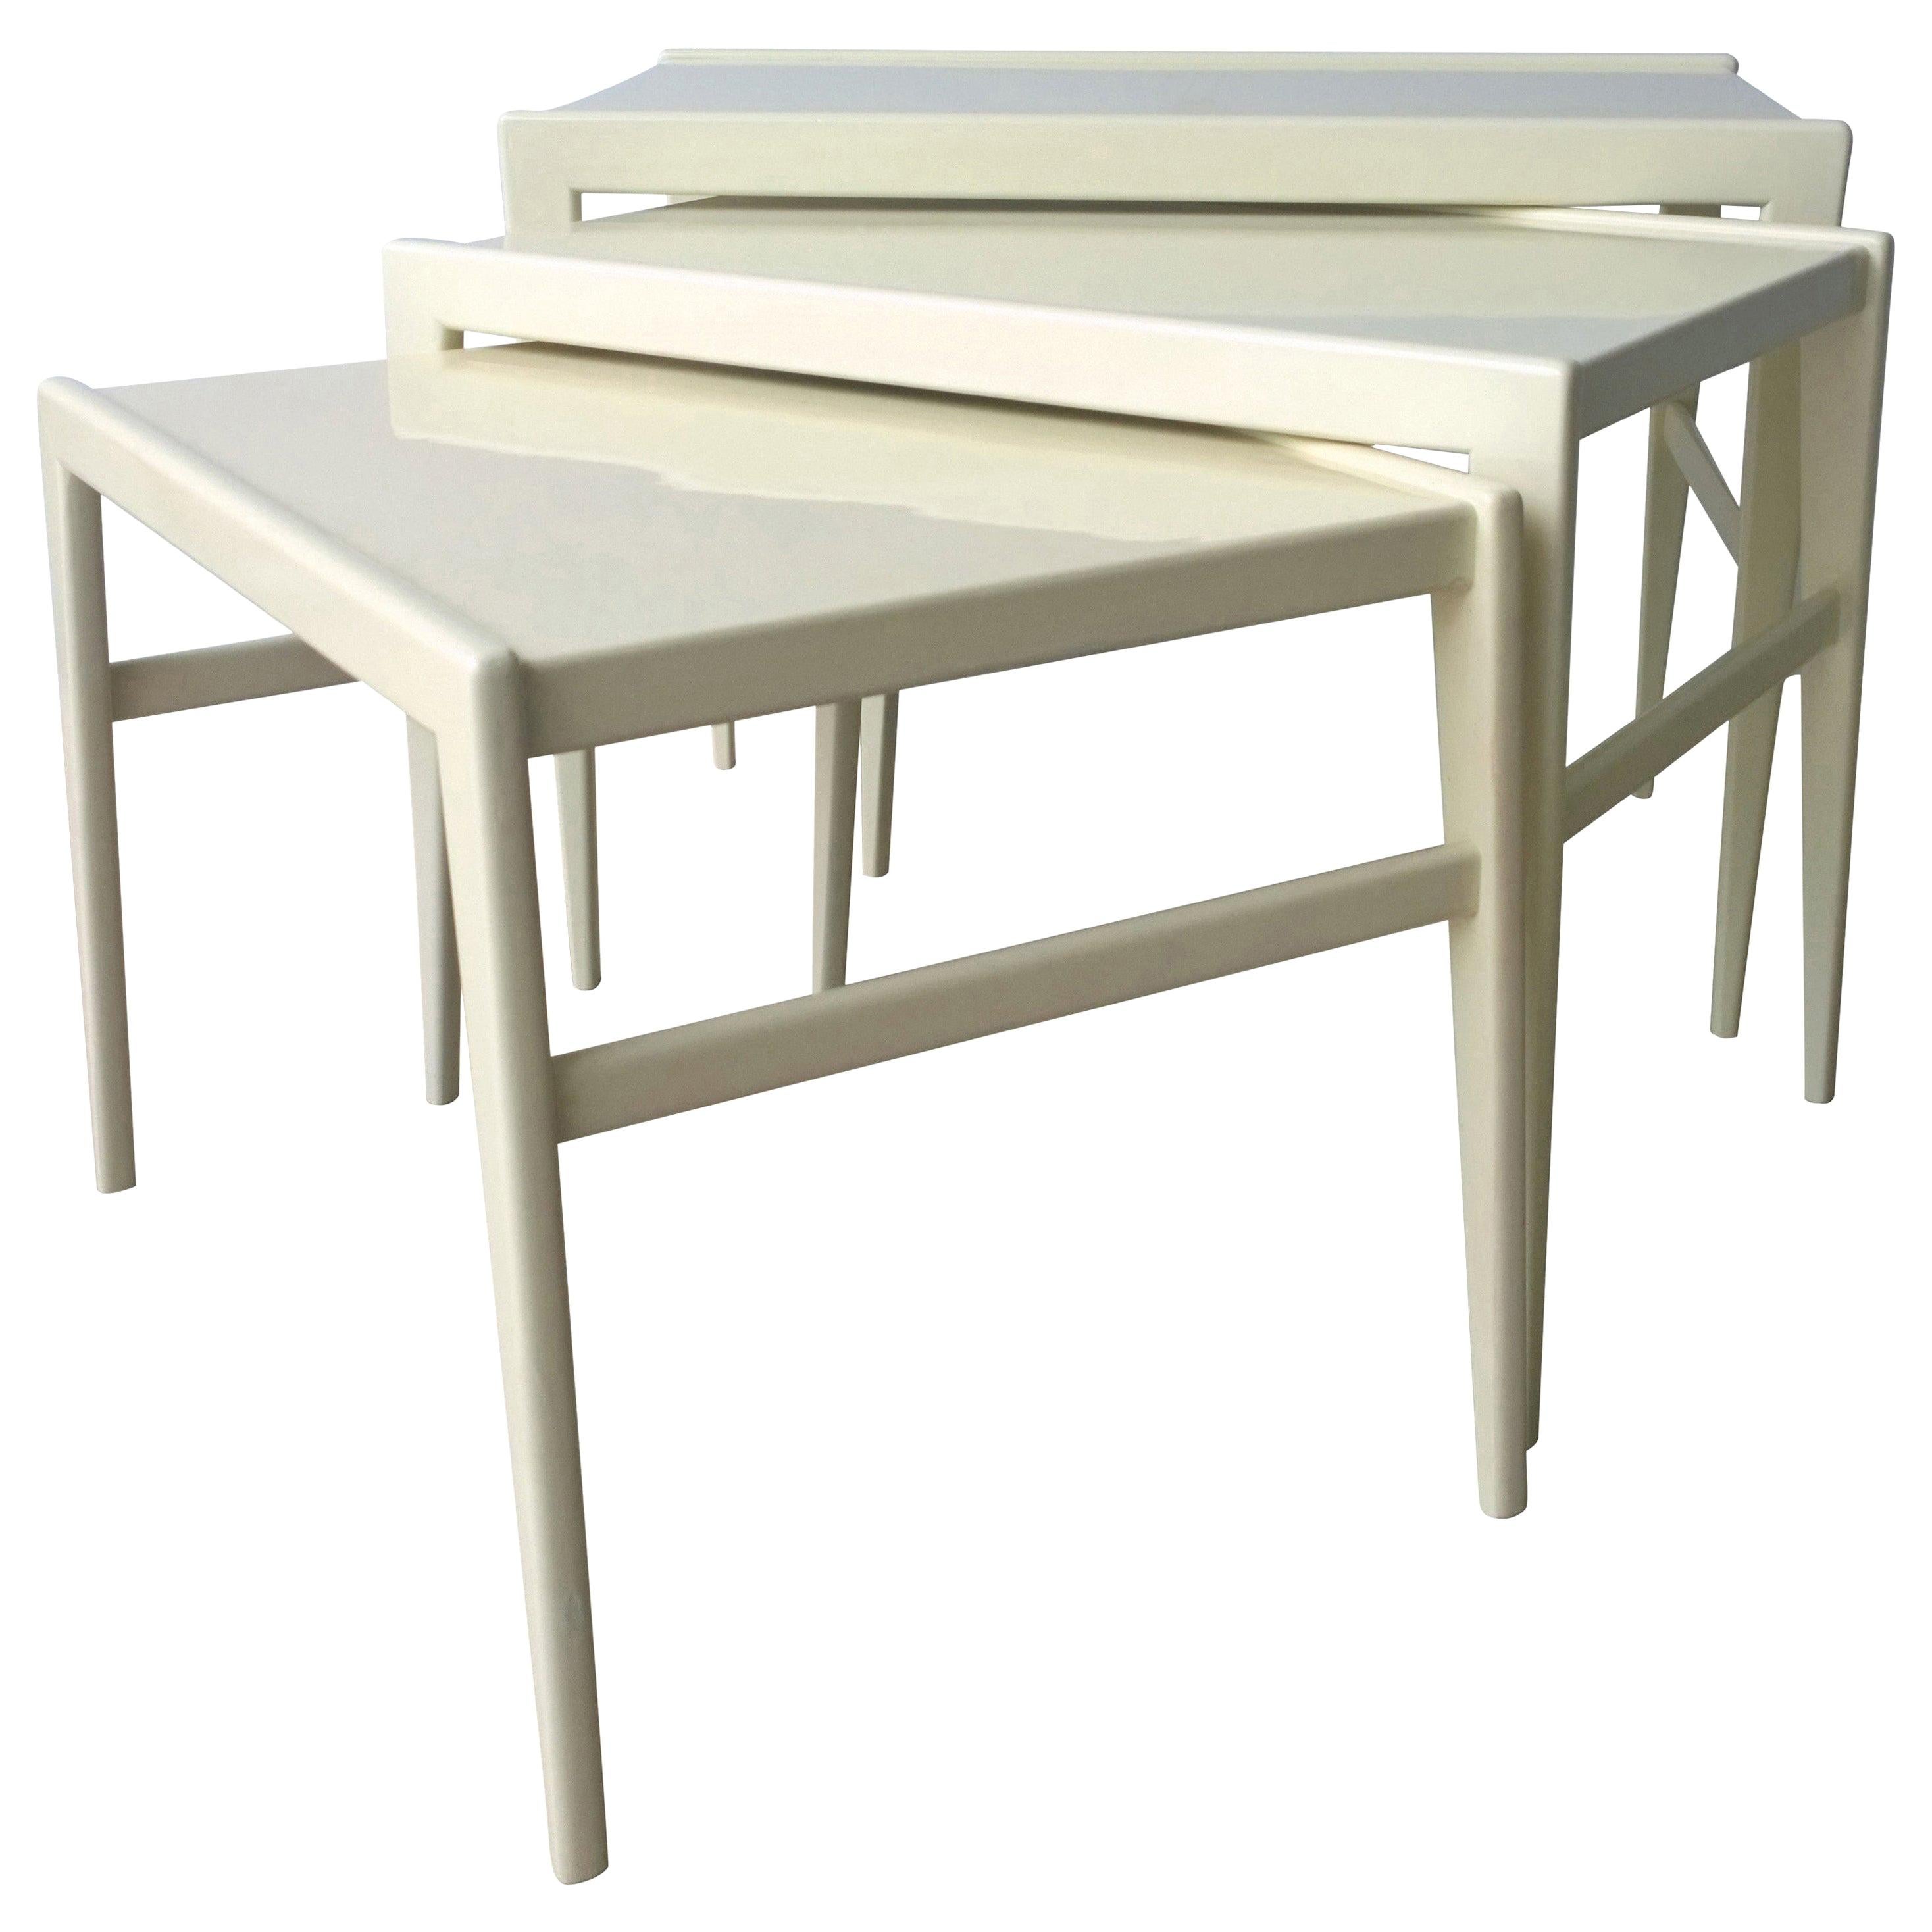 Ico Parisi / Singer & Son New Lacquer in Creamy White Wood S/3 Stacking Tables For Sale